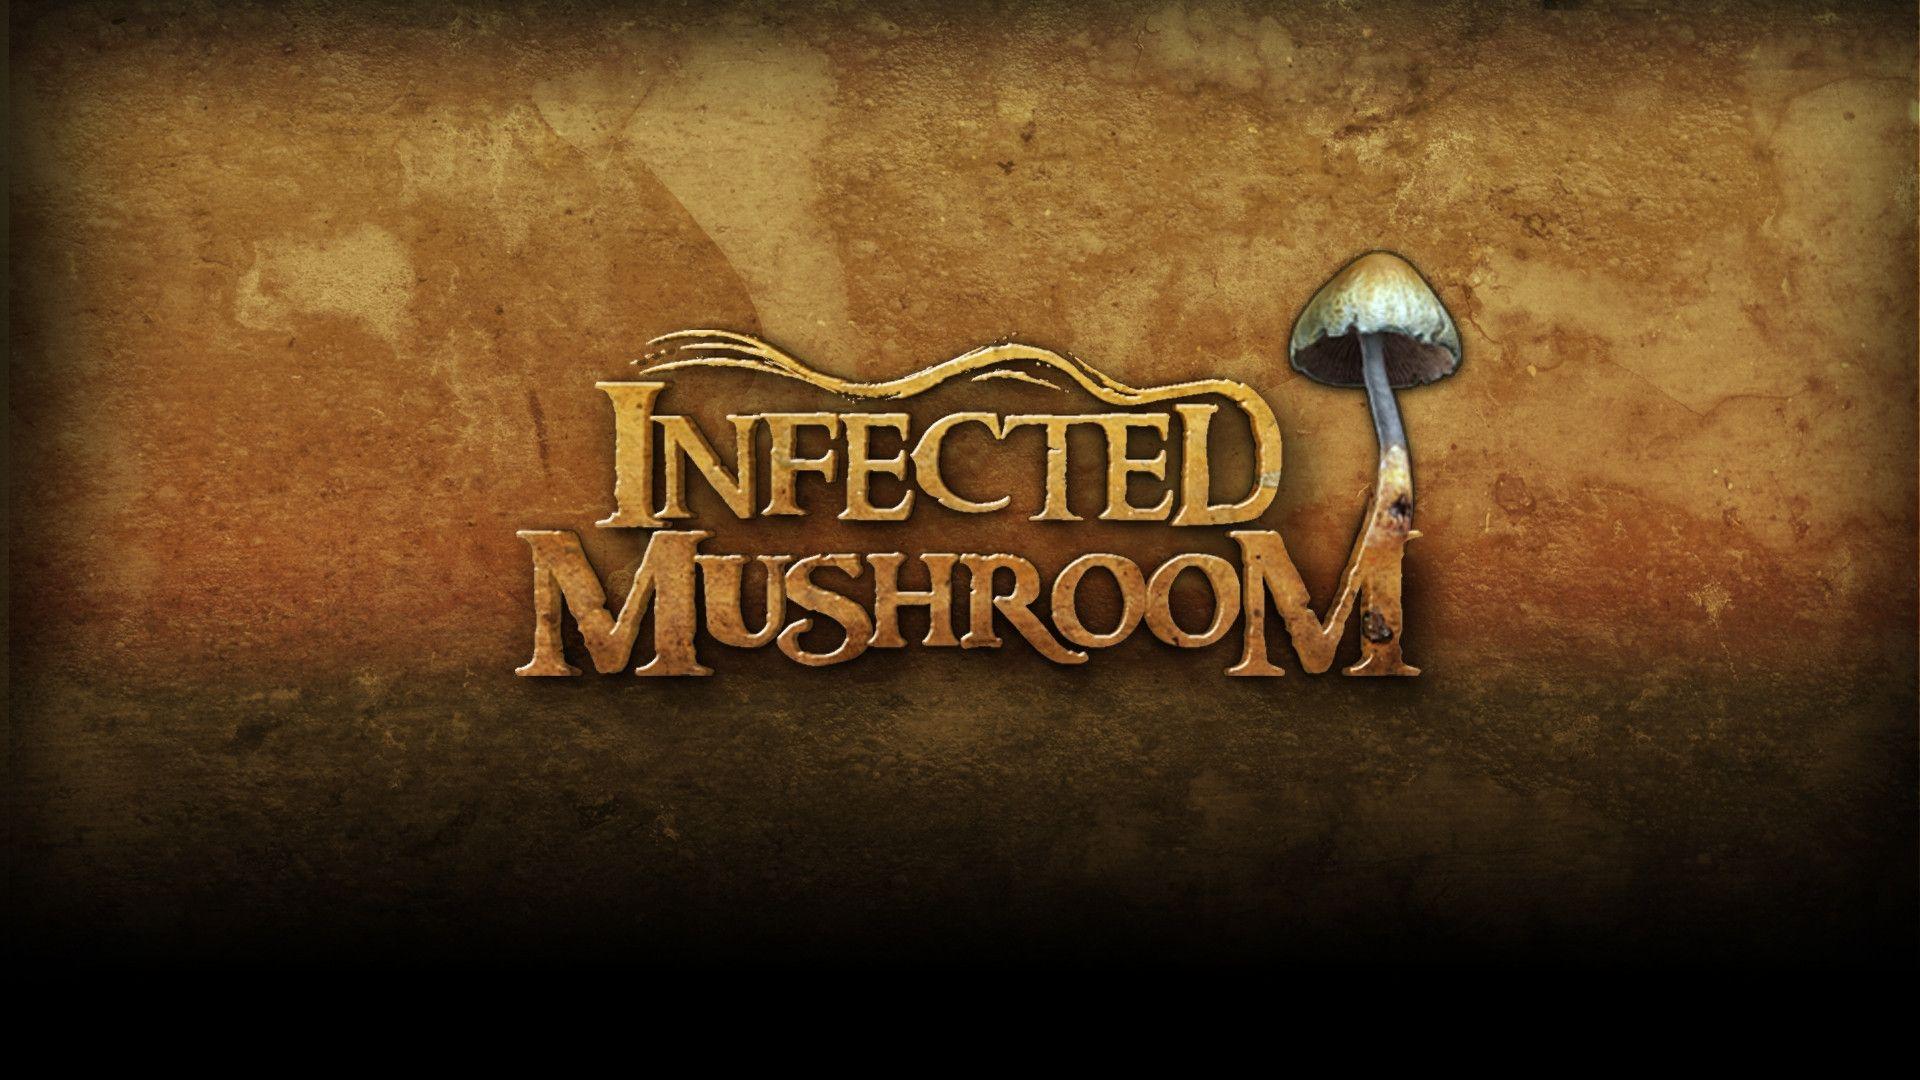 Download Wallpaper infected mushroom, letters, background